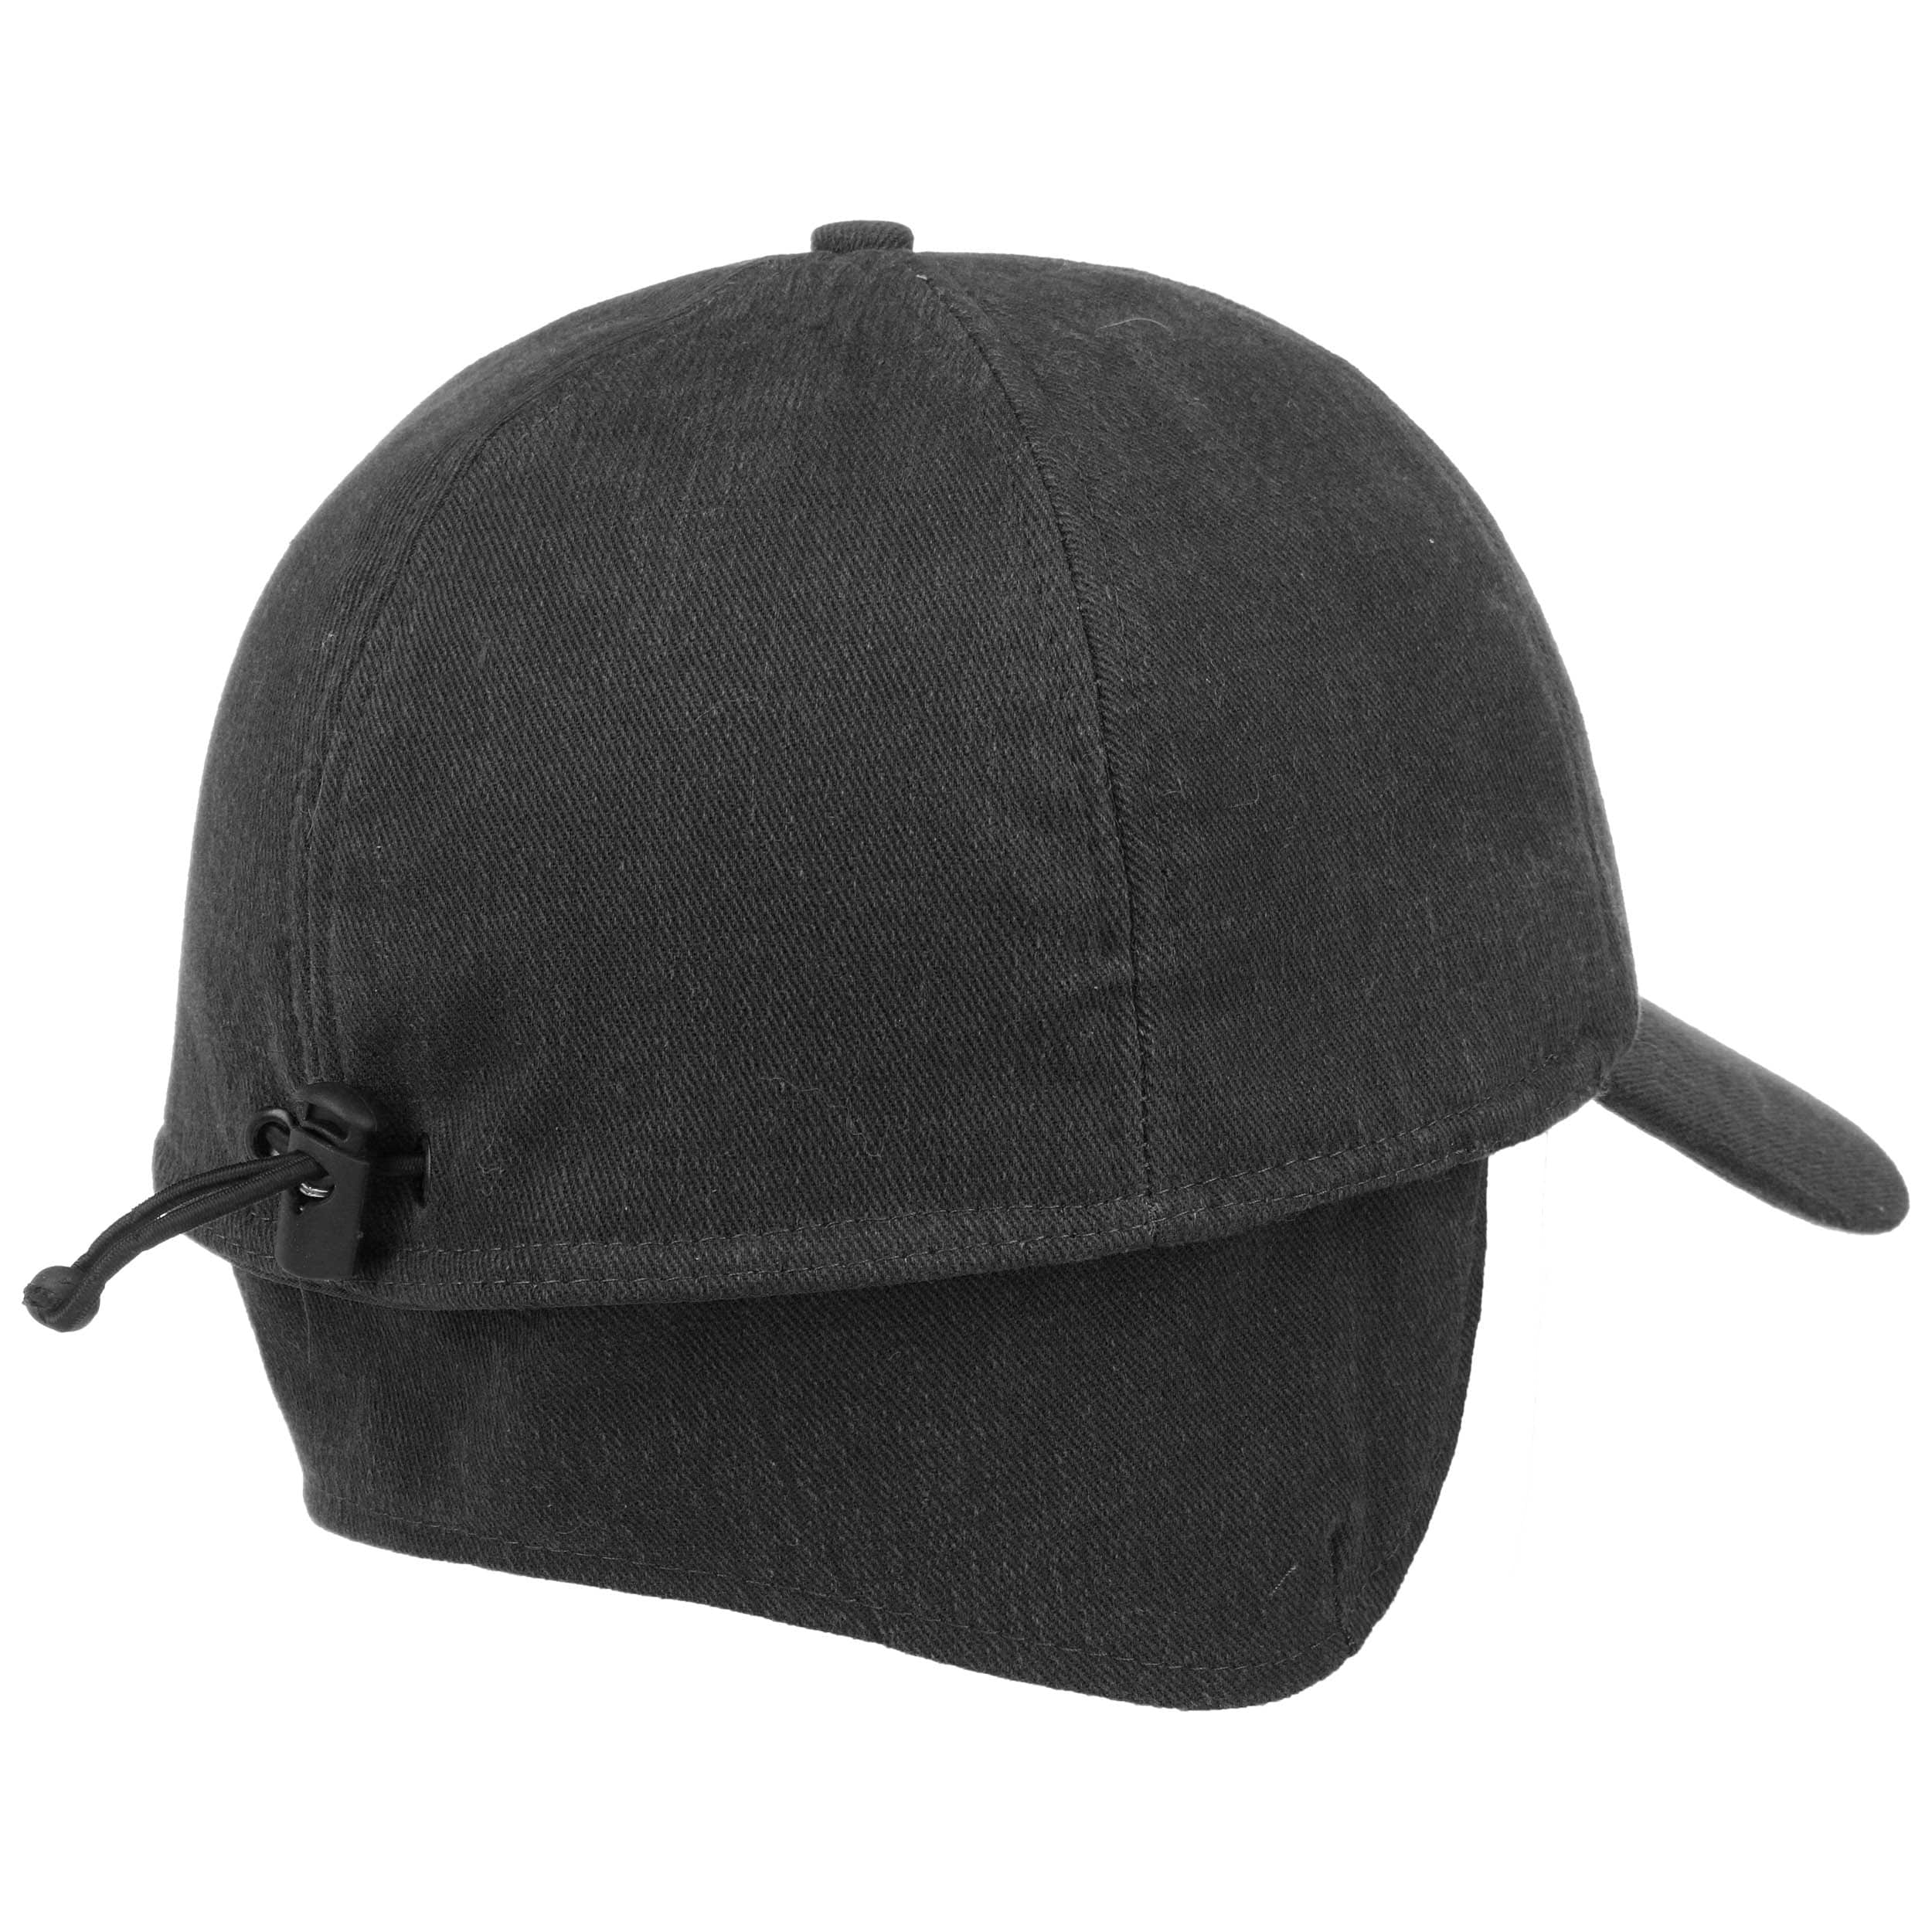 Thinsulate Cap mit Ohrenklappen by Lipodo € - 24,95